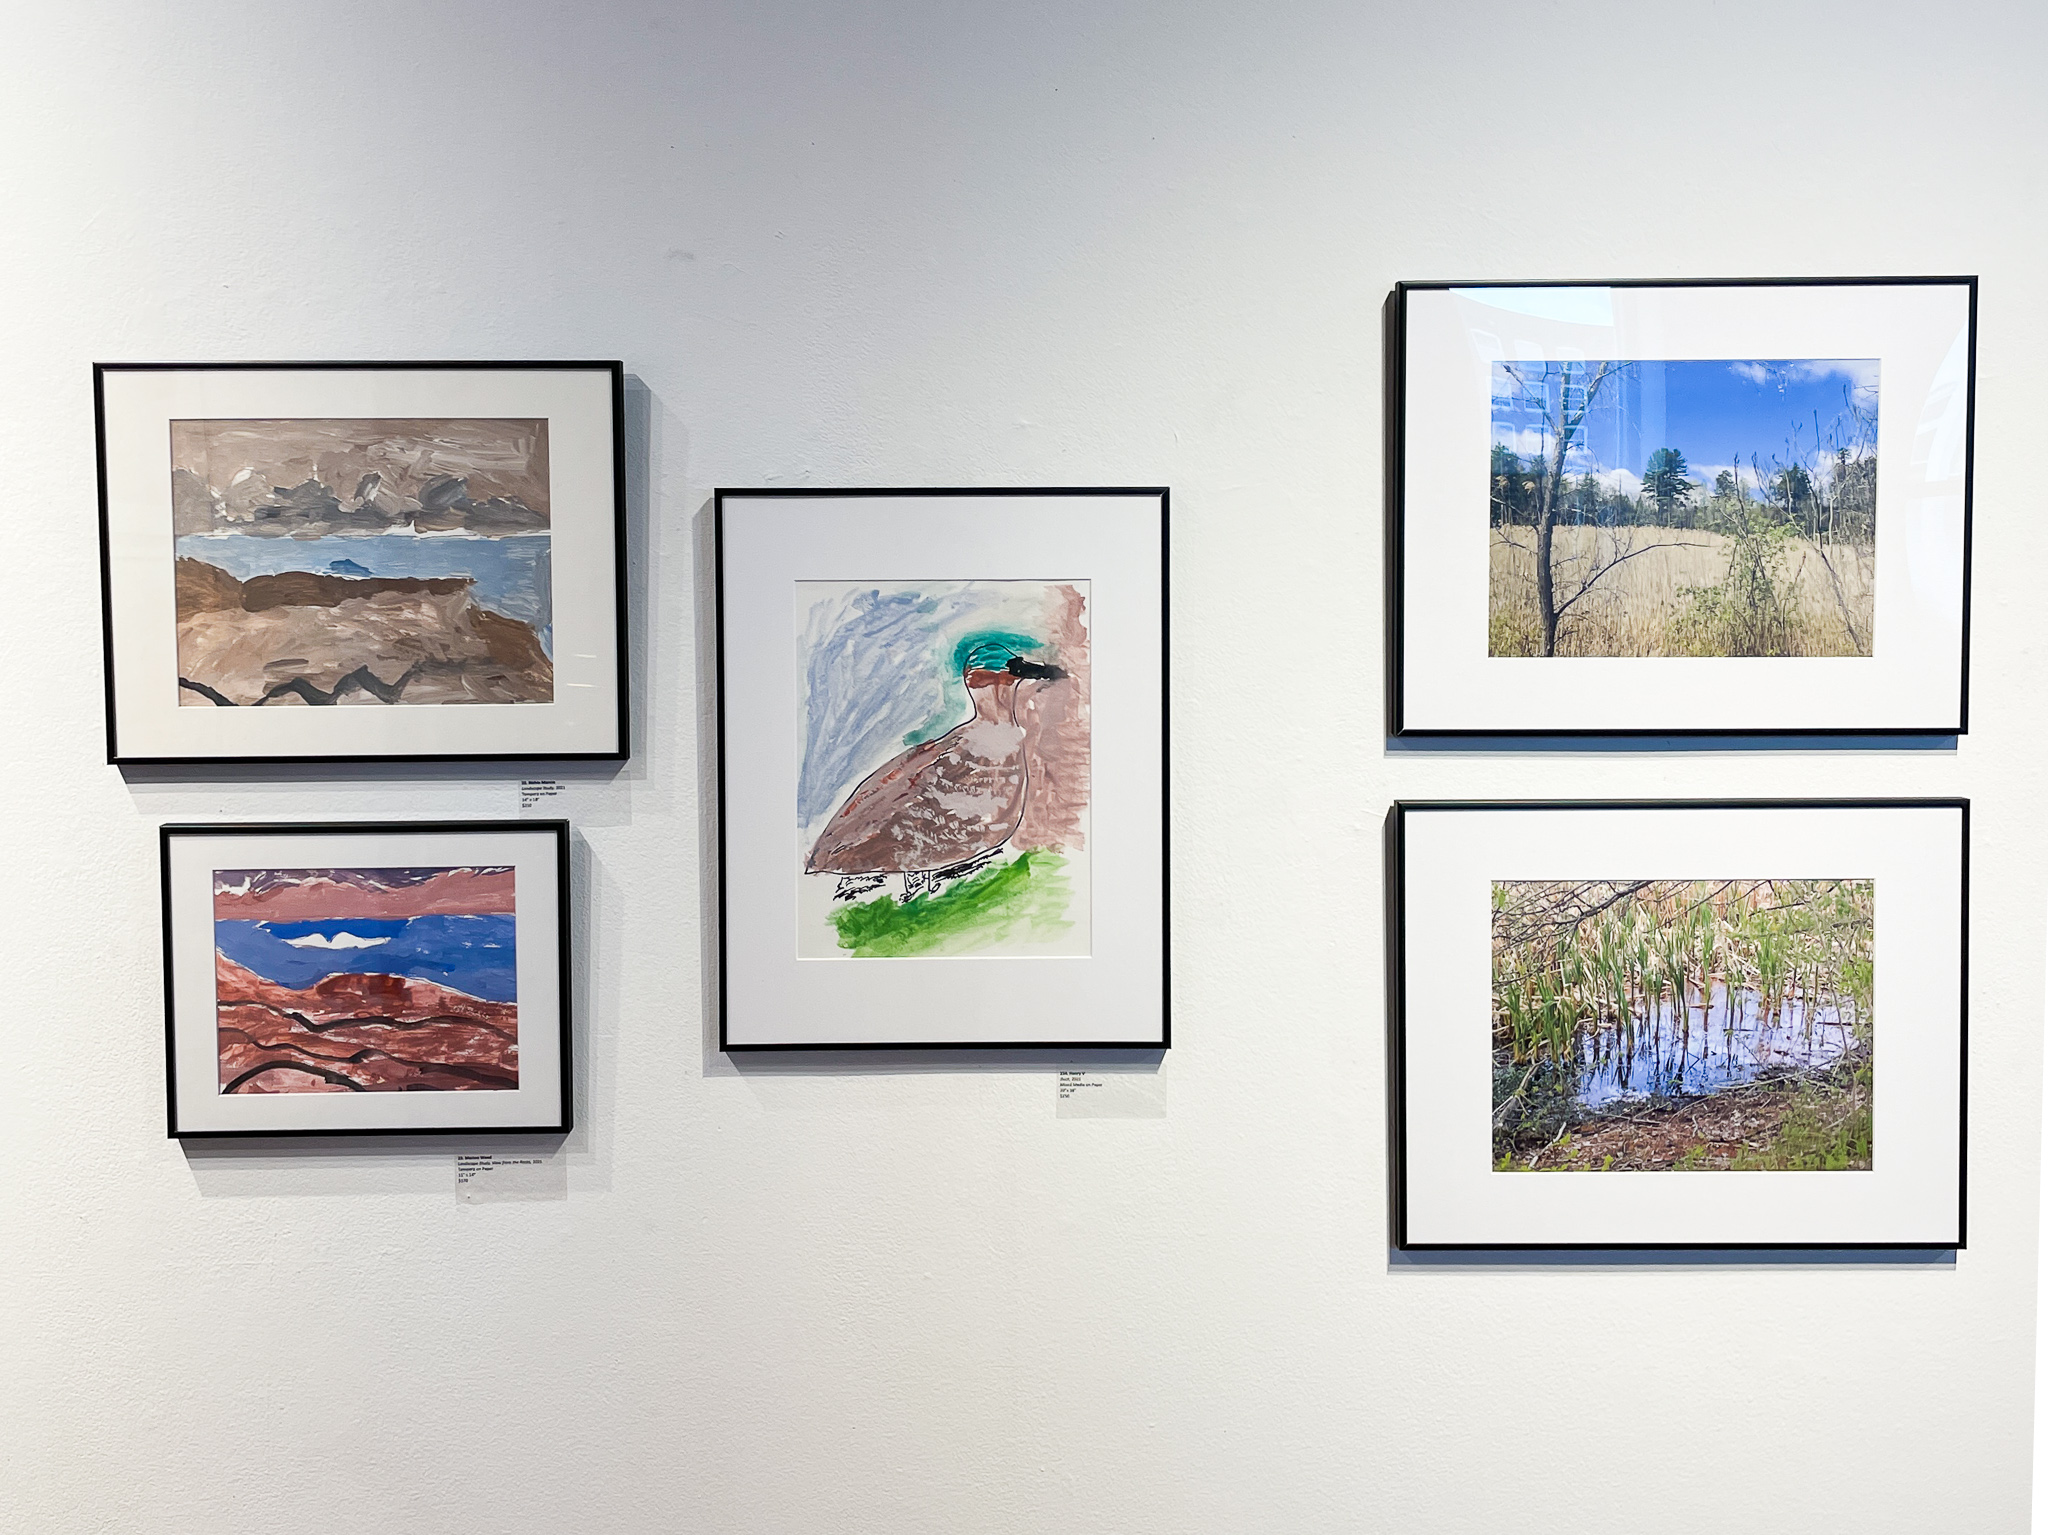 Gallery wall with paintings and photos of wildlife